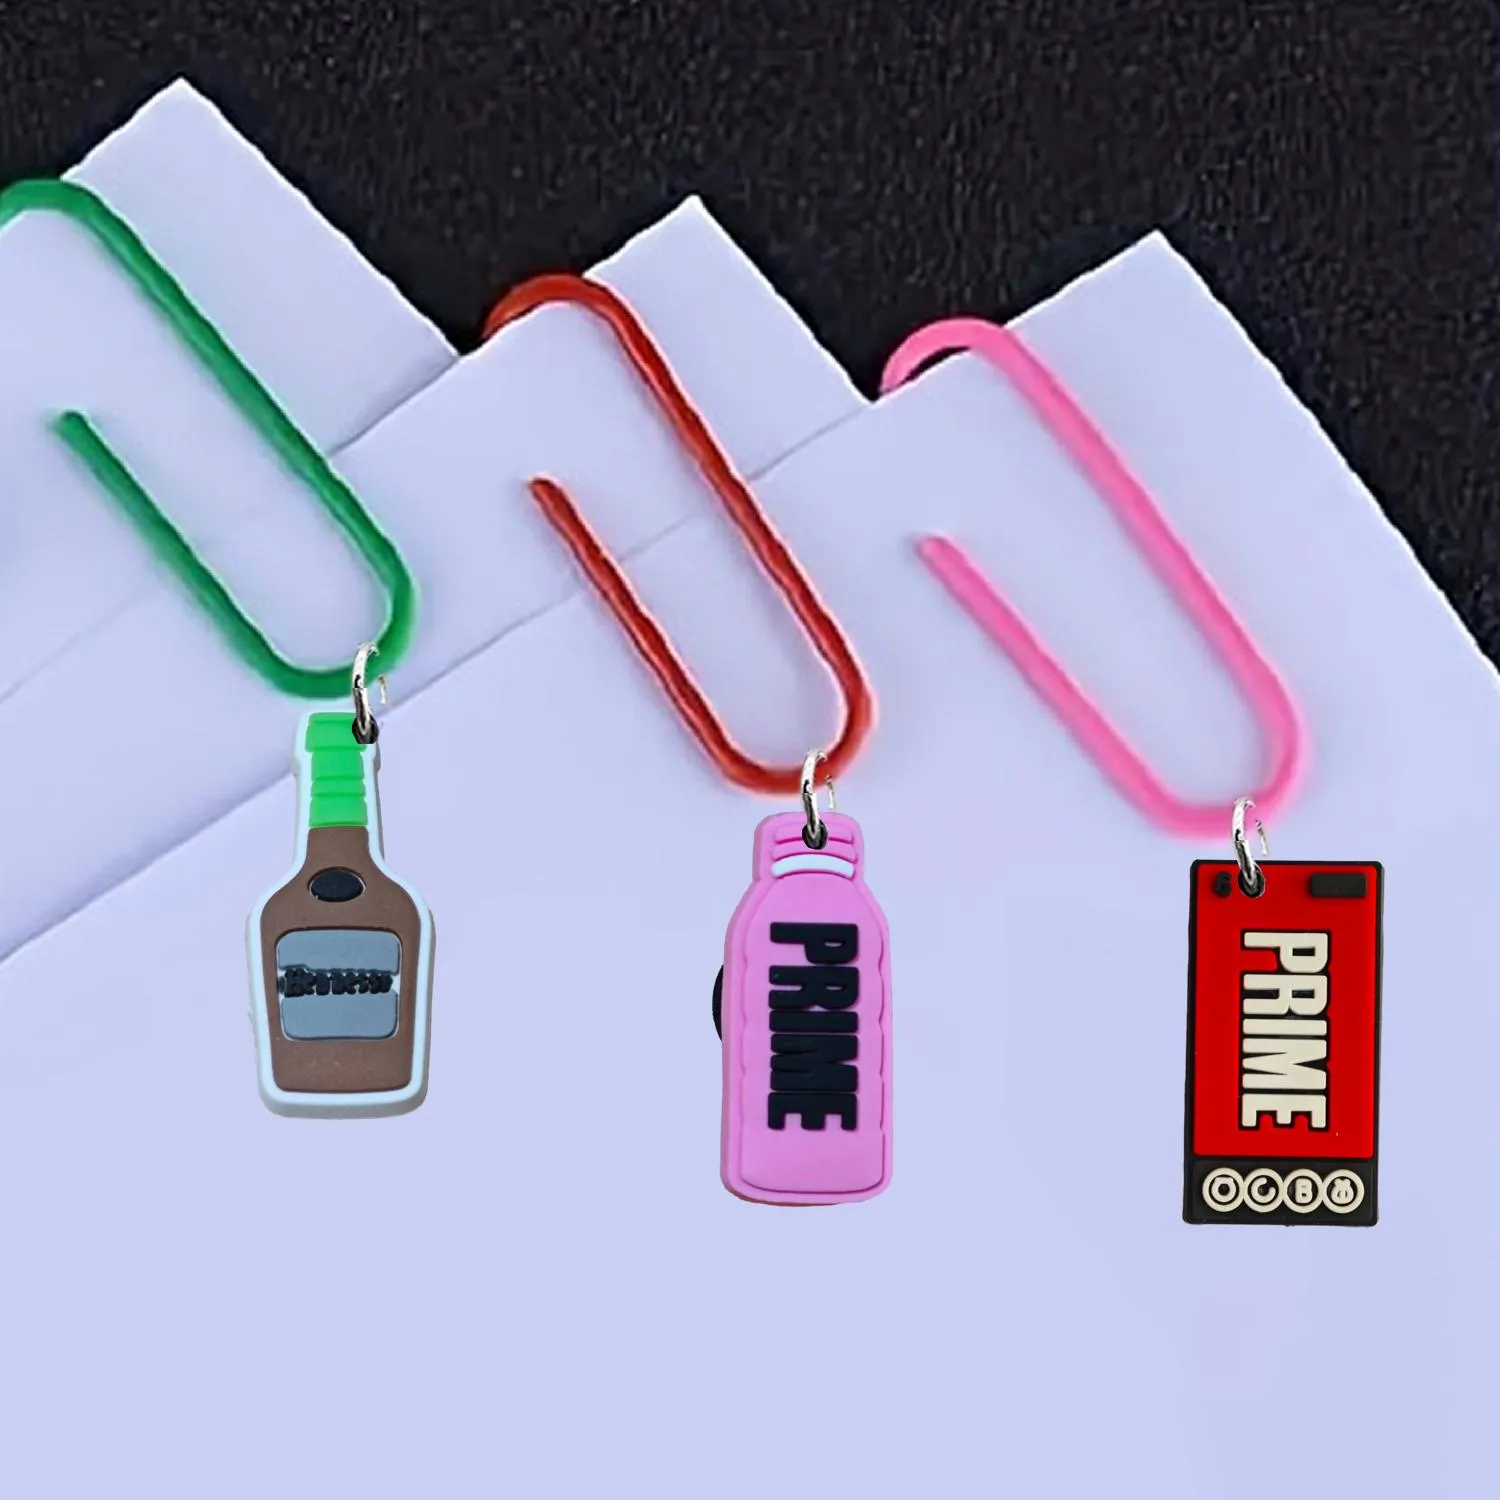 Arts And Crafts Prime Bottle Cartoon Paper Clips Bookmark Clamp Desk Accessories Stationery For School Nurse Gifts Colorf Memo Paginat Otiyr